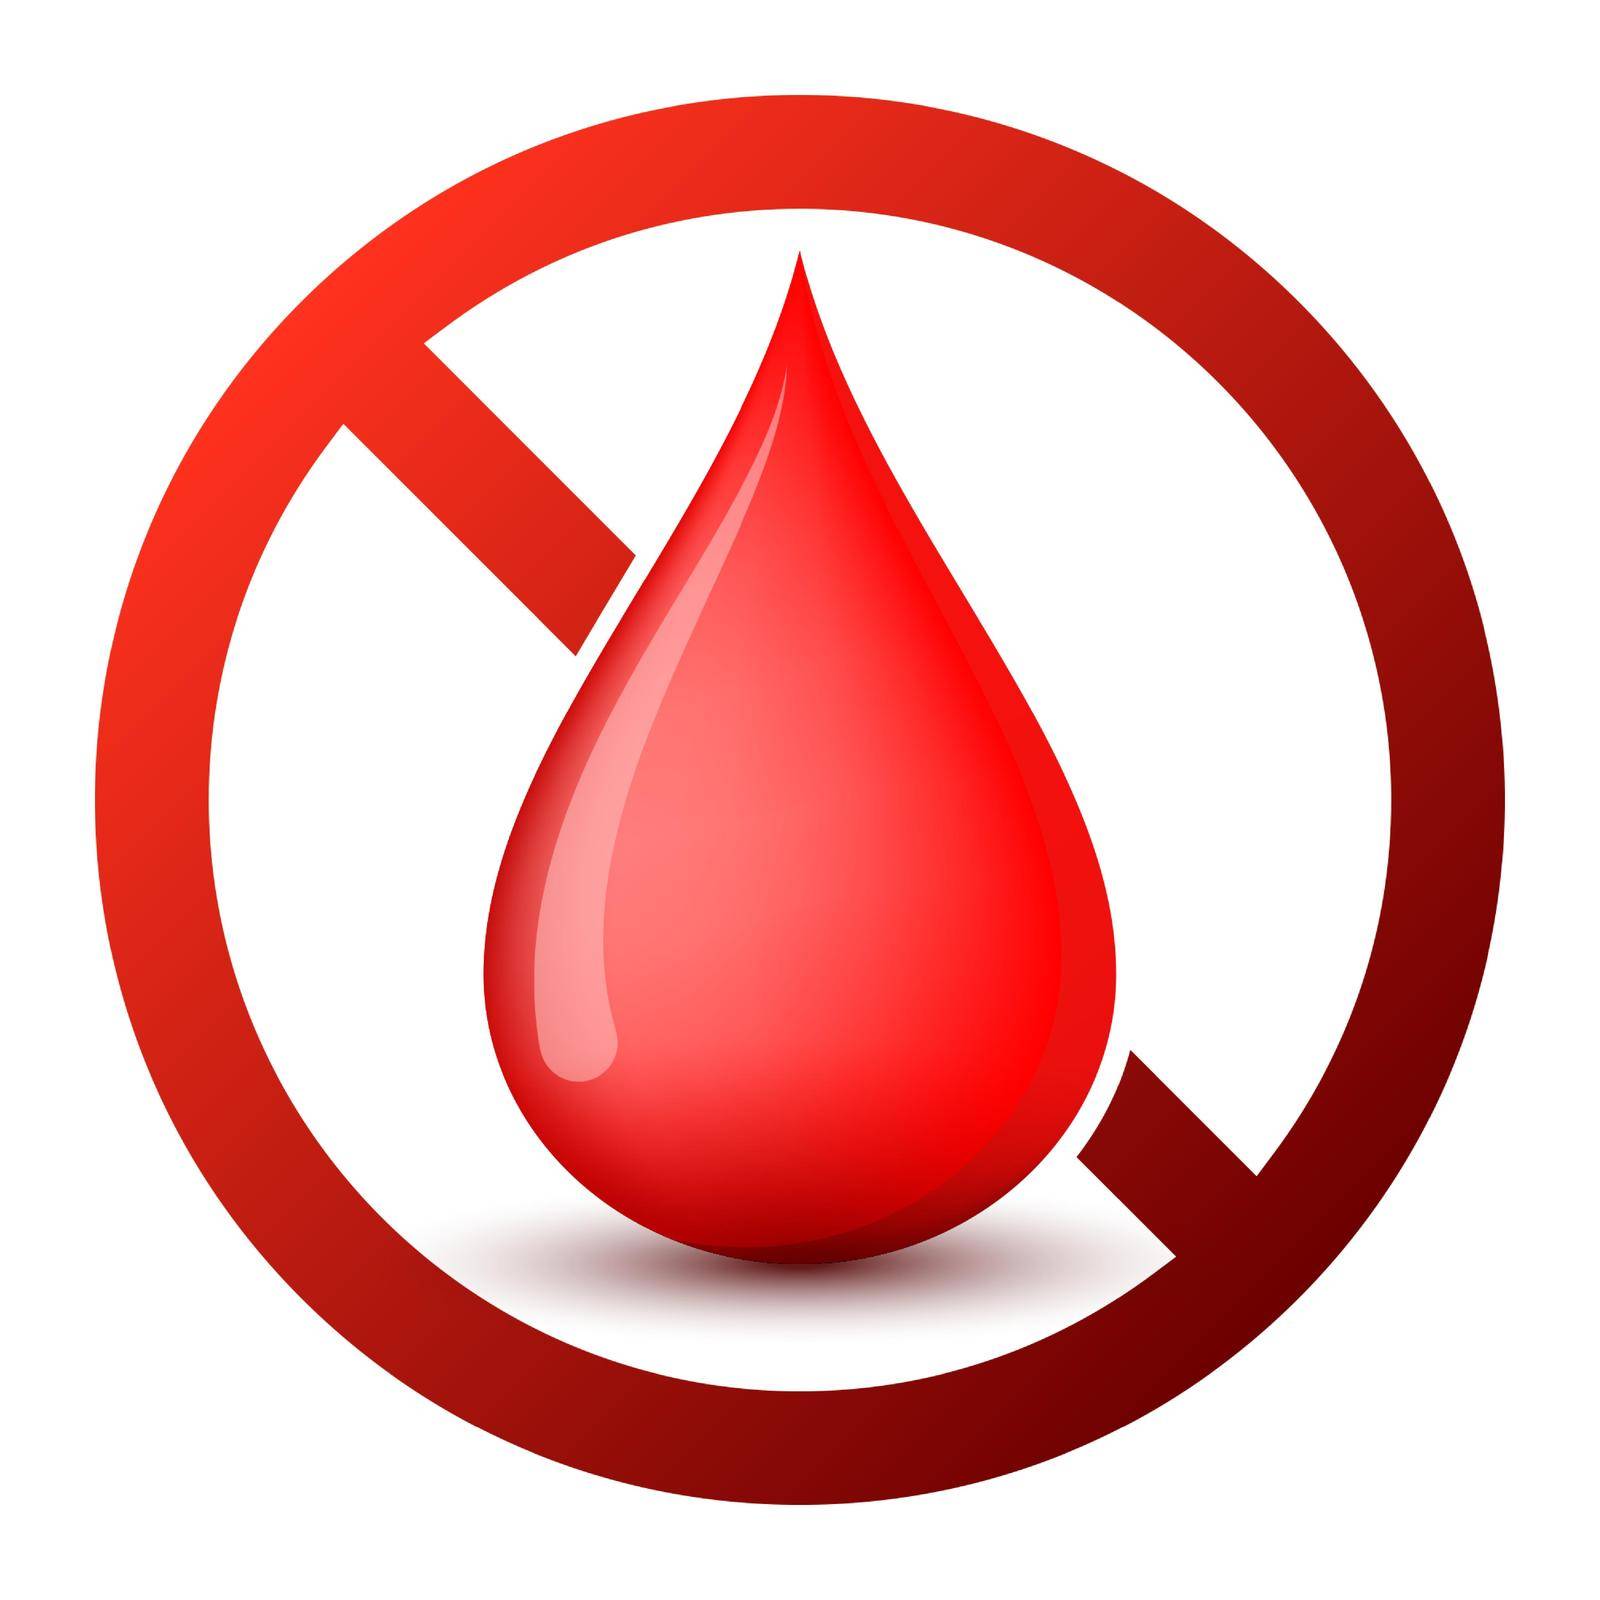 No blood drop icon. Blood donation is prohibited. Vector illustration by Chekman